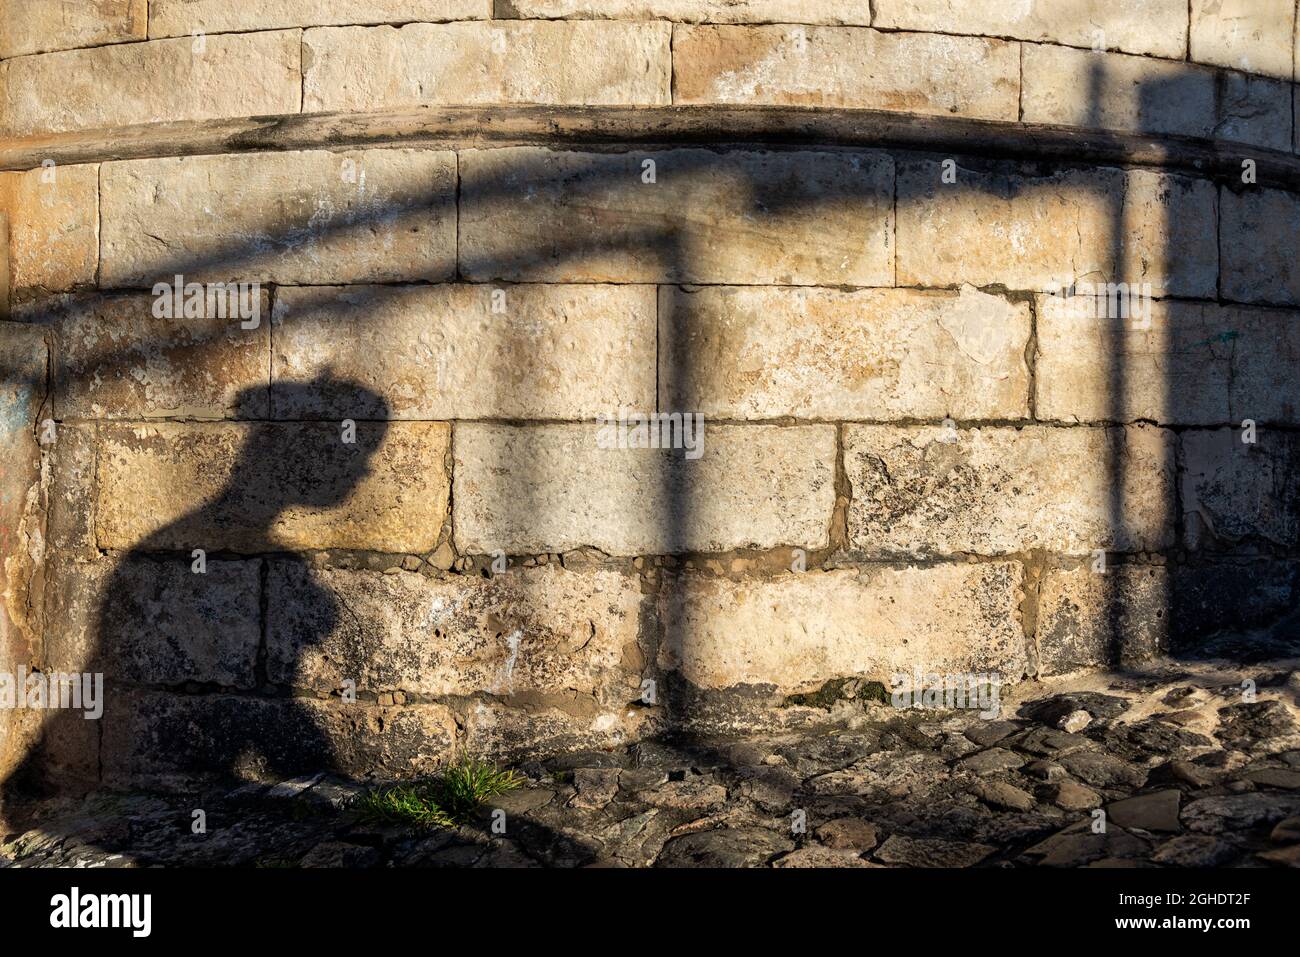 Salvador, Bahia, Brazil - July 18, 2021: Silhouette of the shadows of people on the stone wall in Pelourinho. Stock Photo